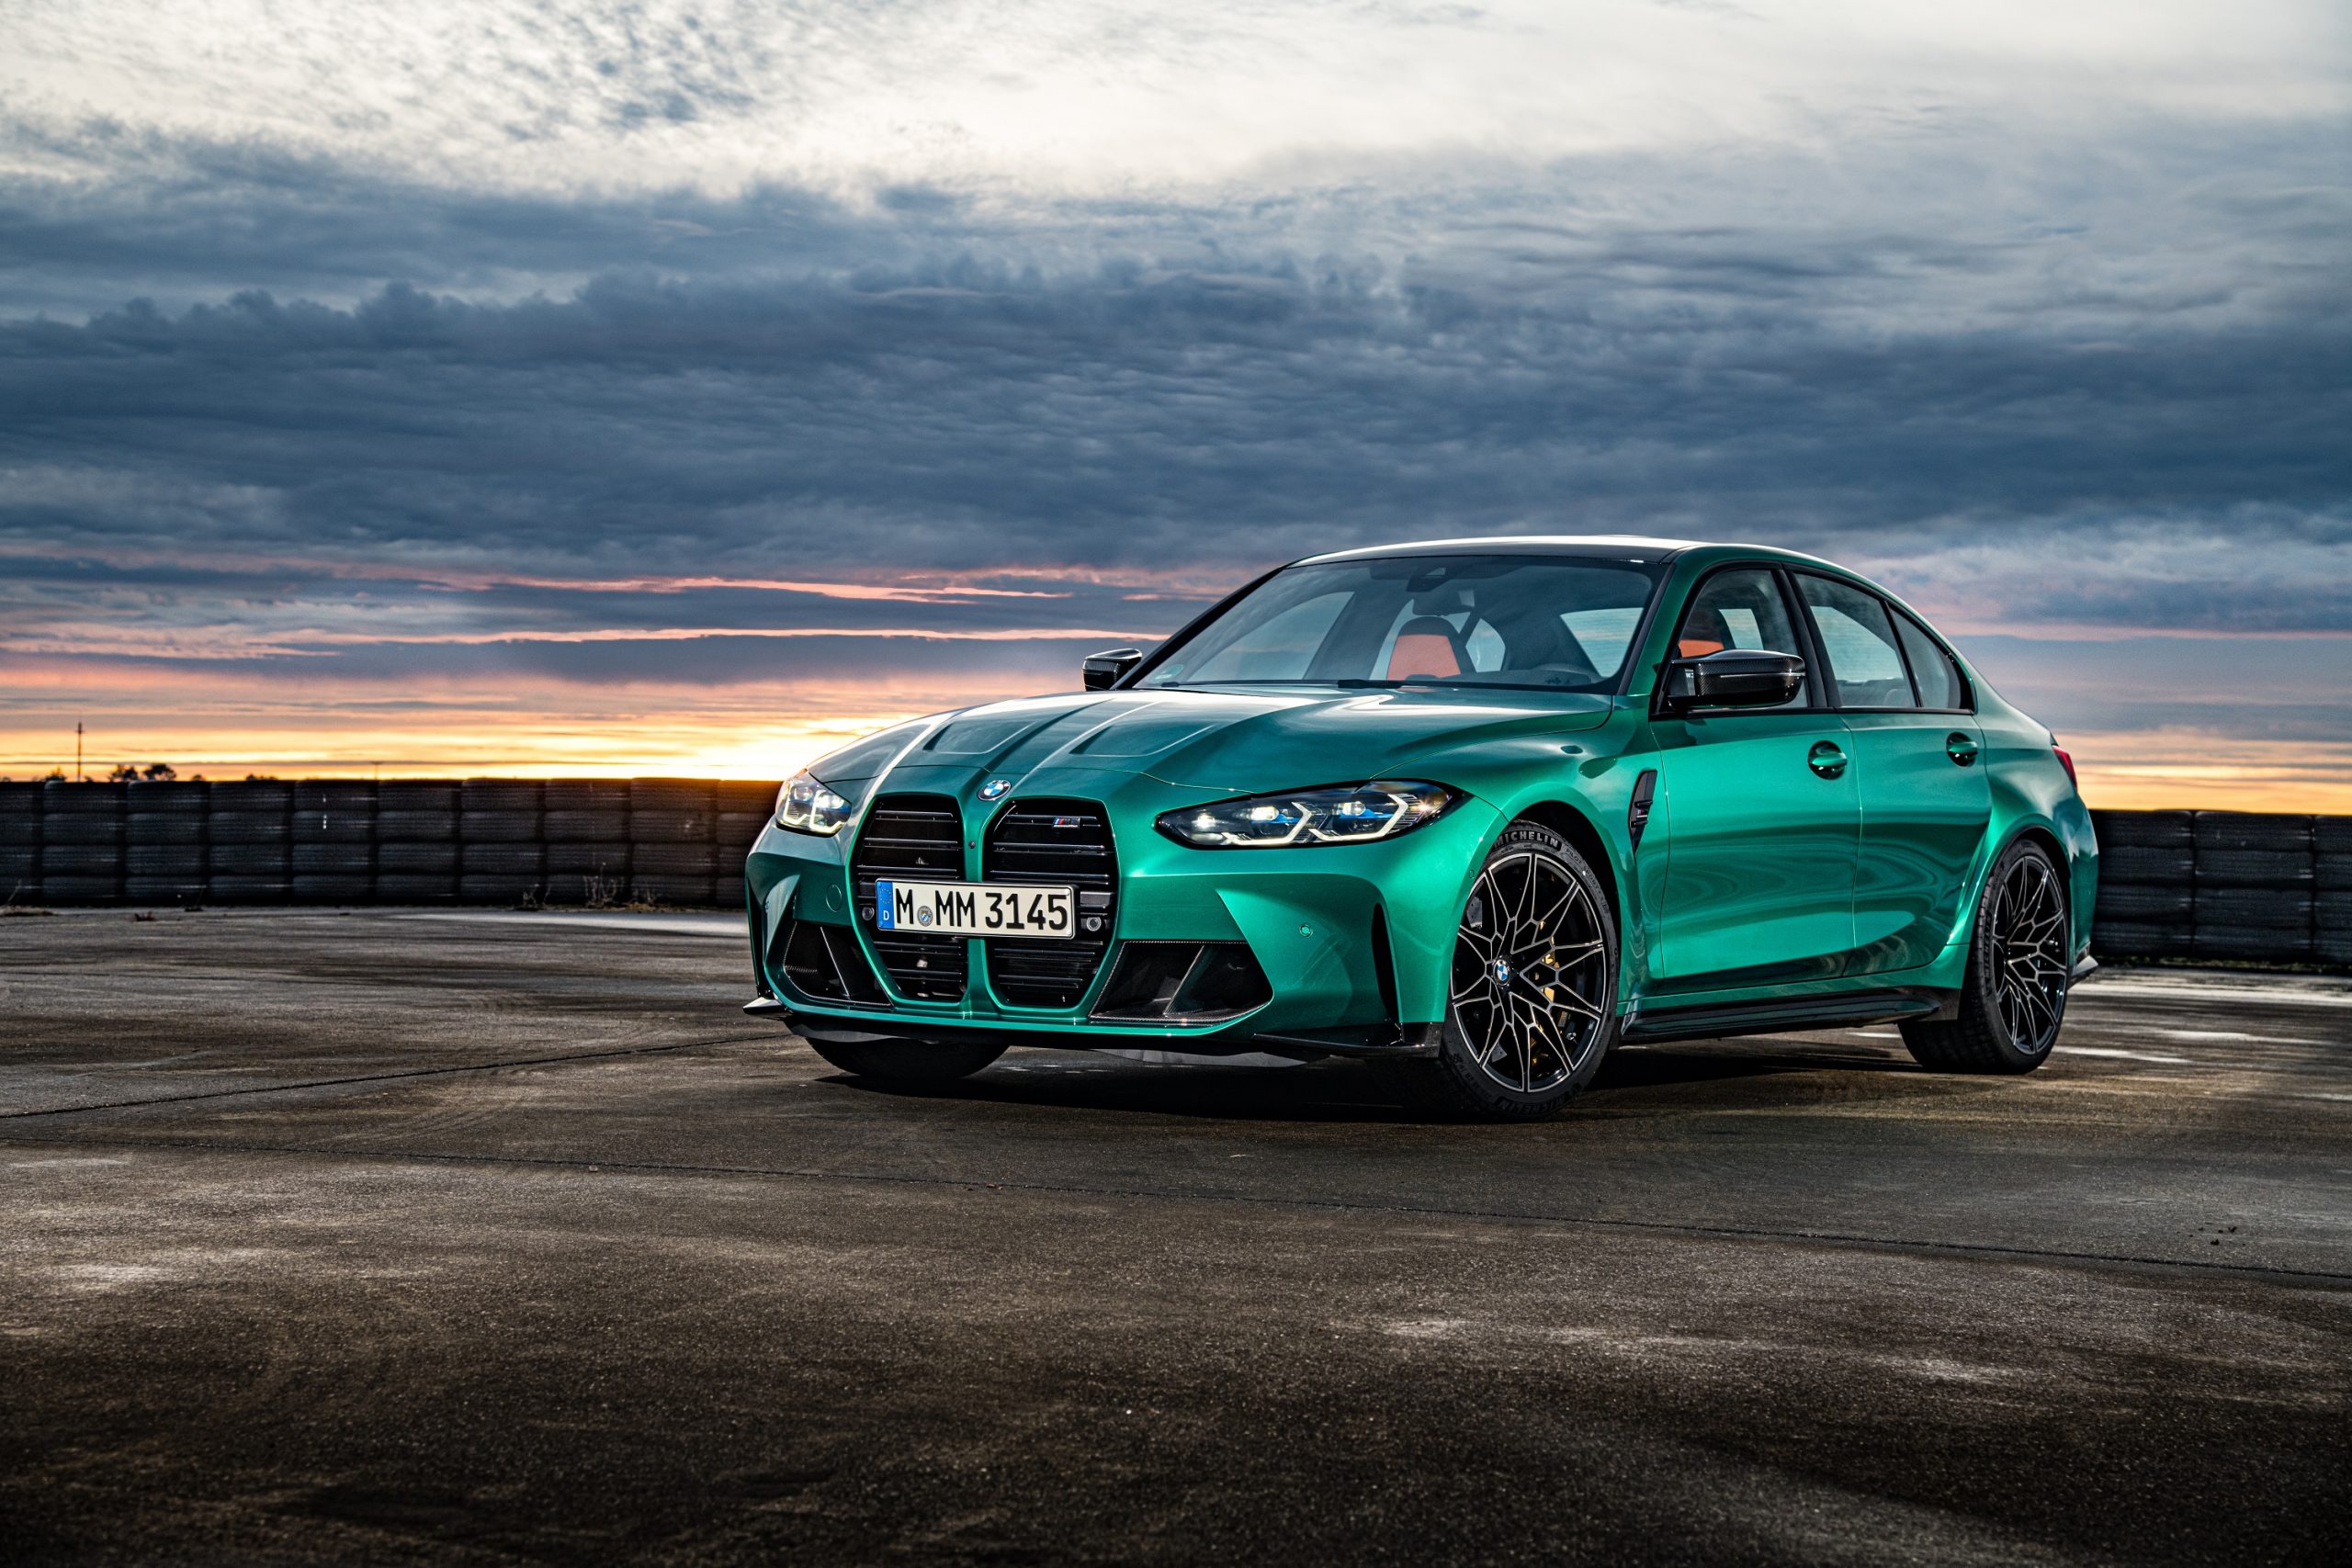 An Isle of Man green BMW M3 shot at sunset in profile